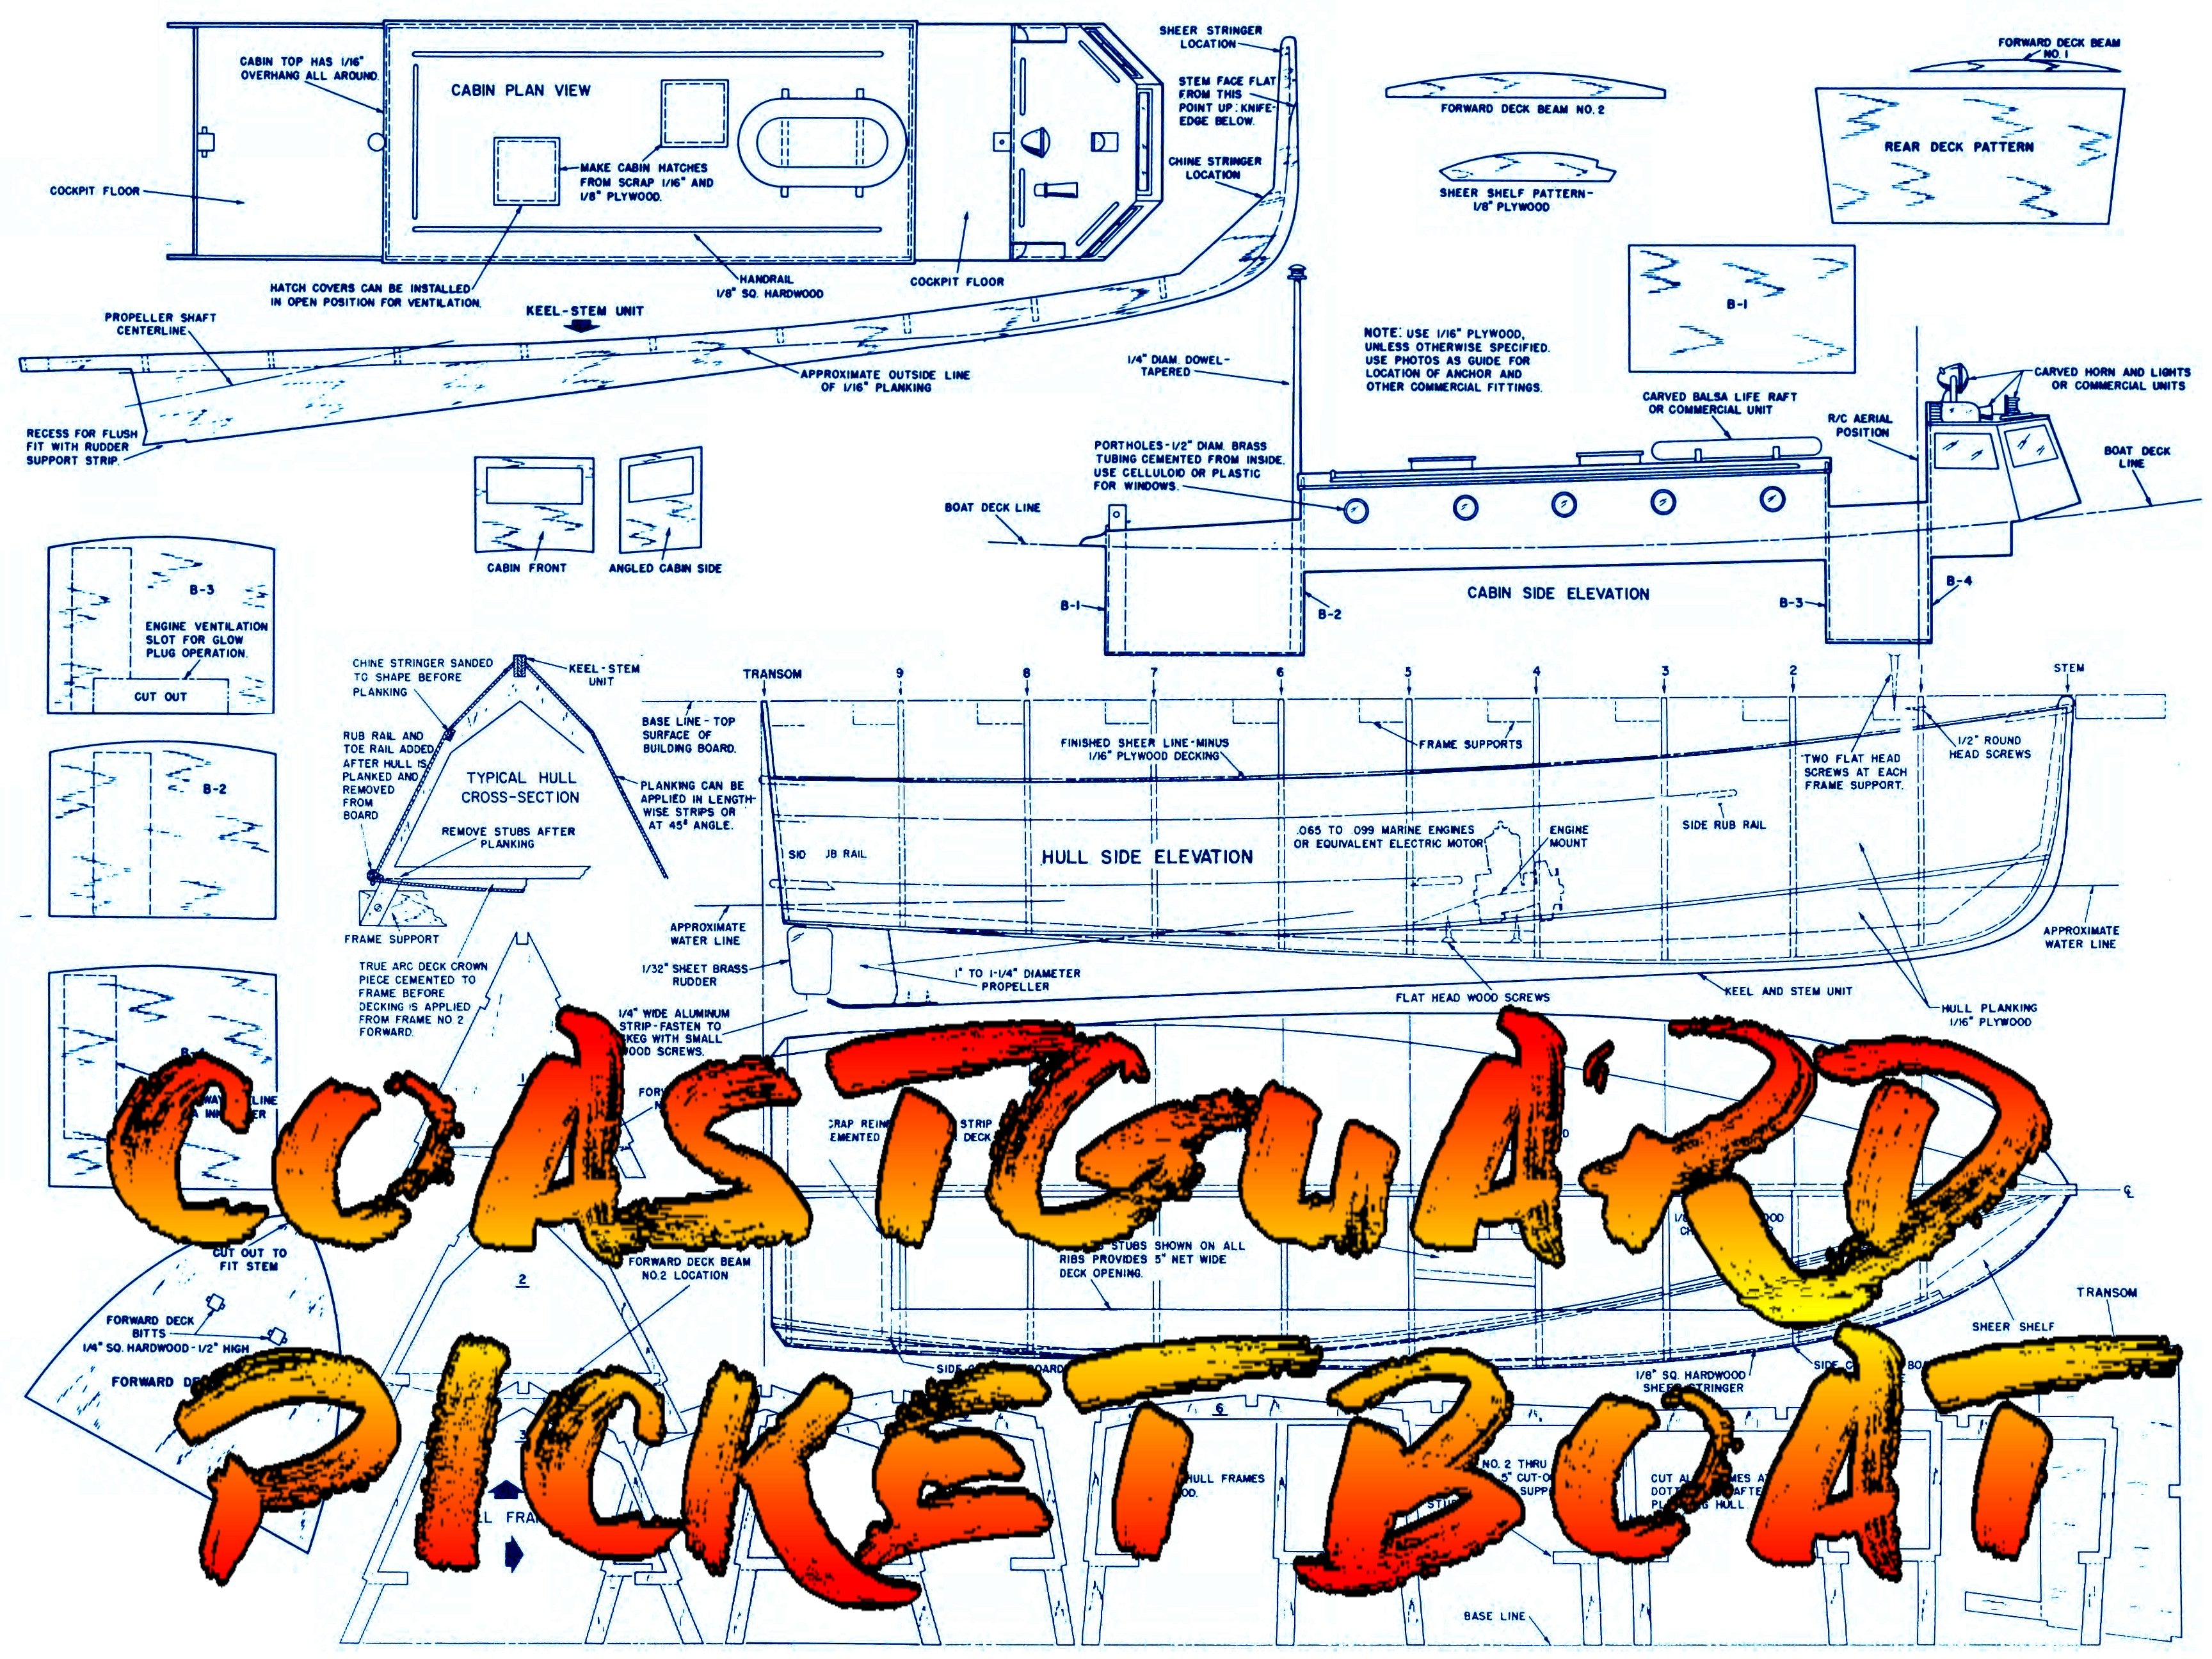 full size printed plans scale 1:16 u.s.c.g. coastguard picket boat suitable for radio control